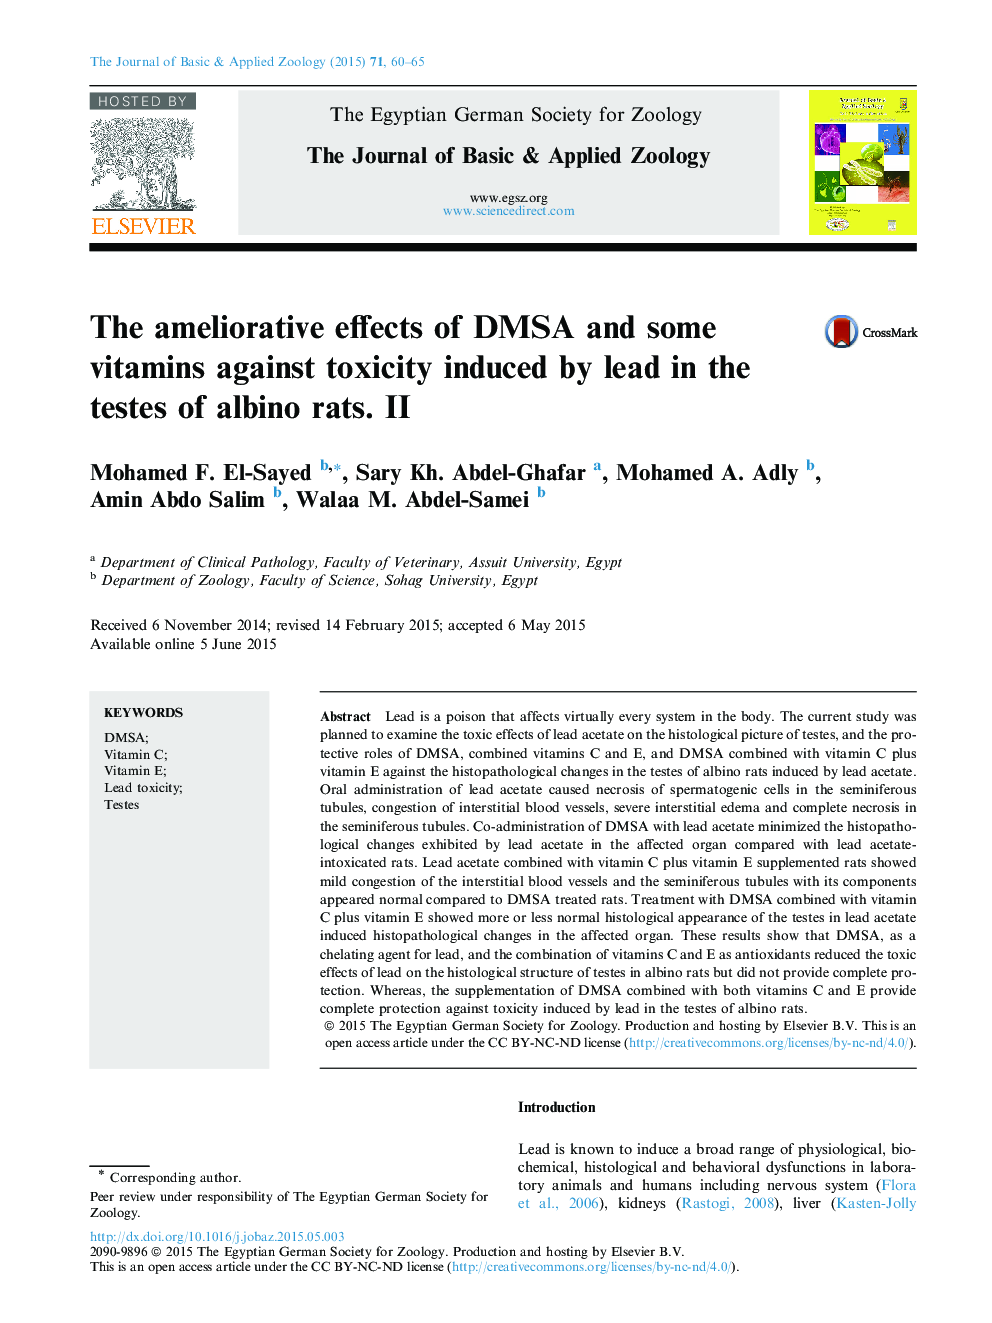 The ameliorative effects of DMSA and some vitamins against toxicity induced by lead in the testes of albino rats. II 